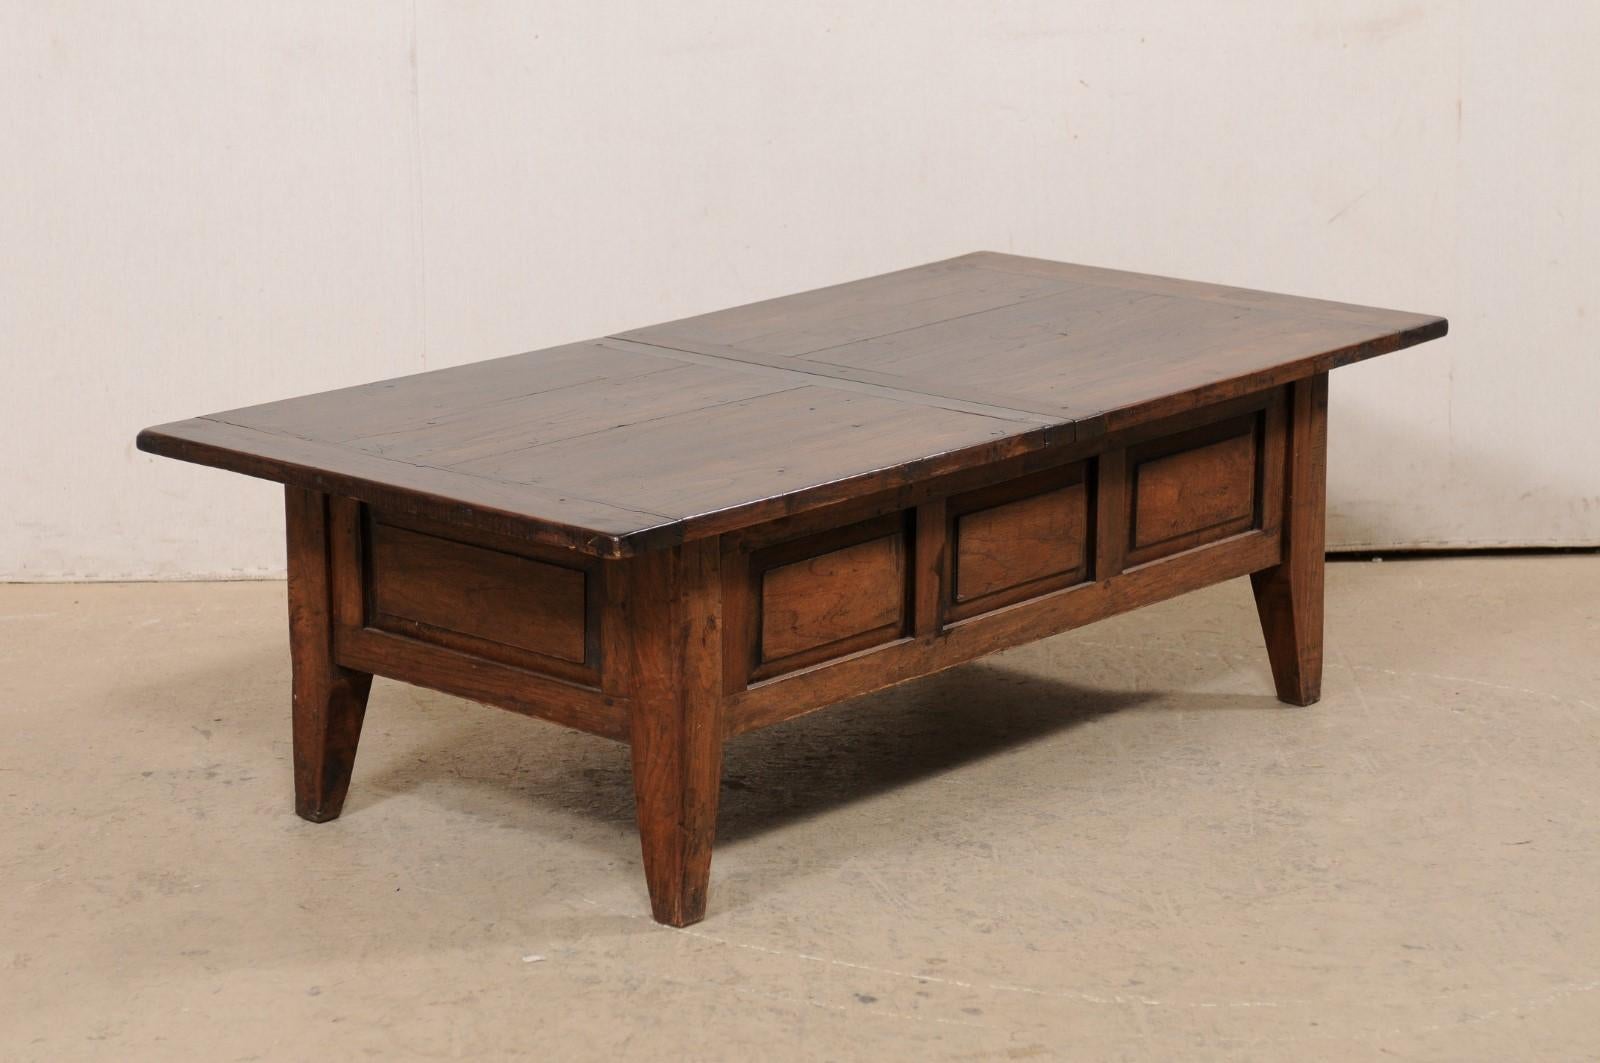 French Fruitwood Coffee Table in Rectangular-Shape w/Storage, Early 20th Century For Sale 7